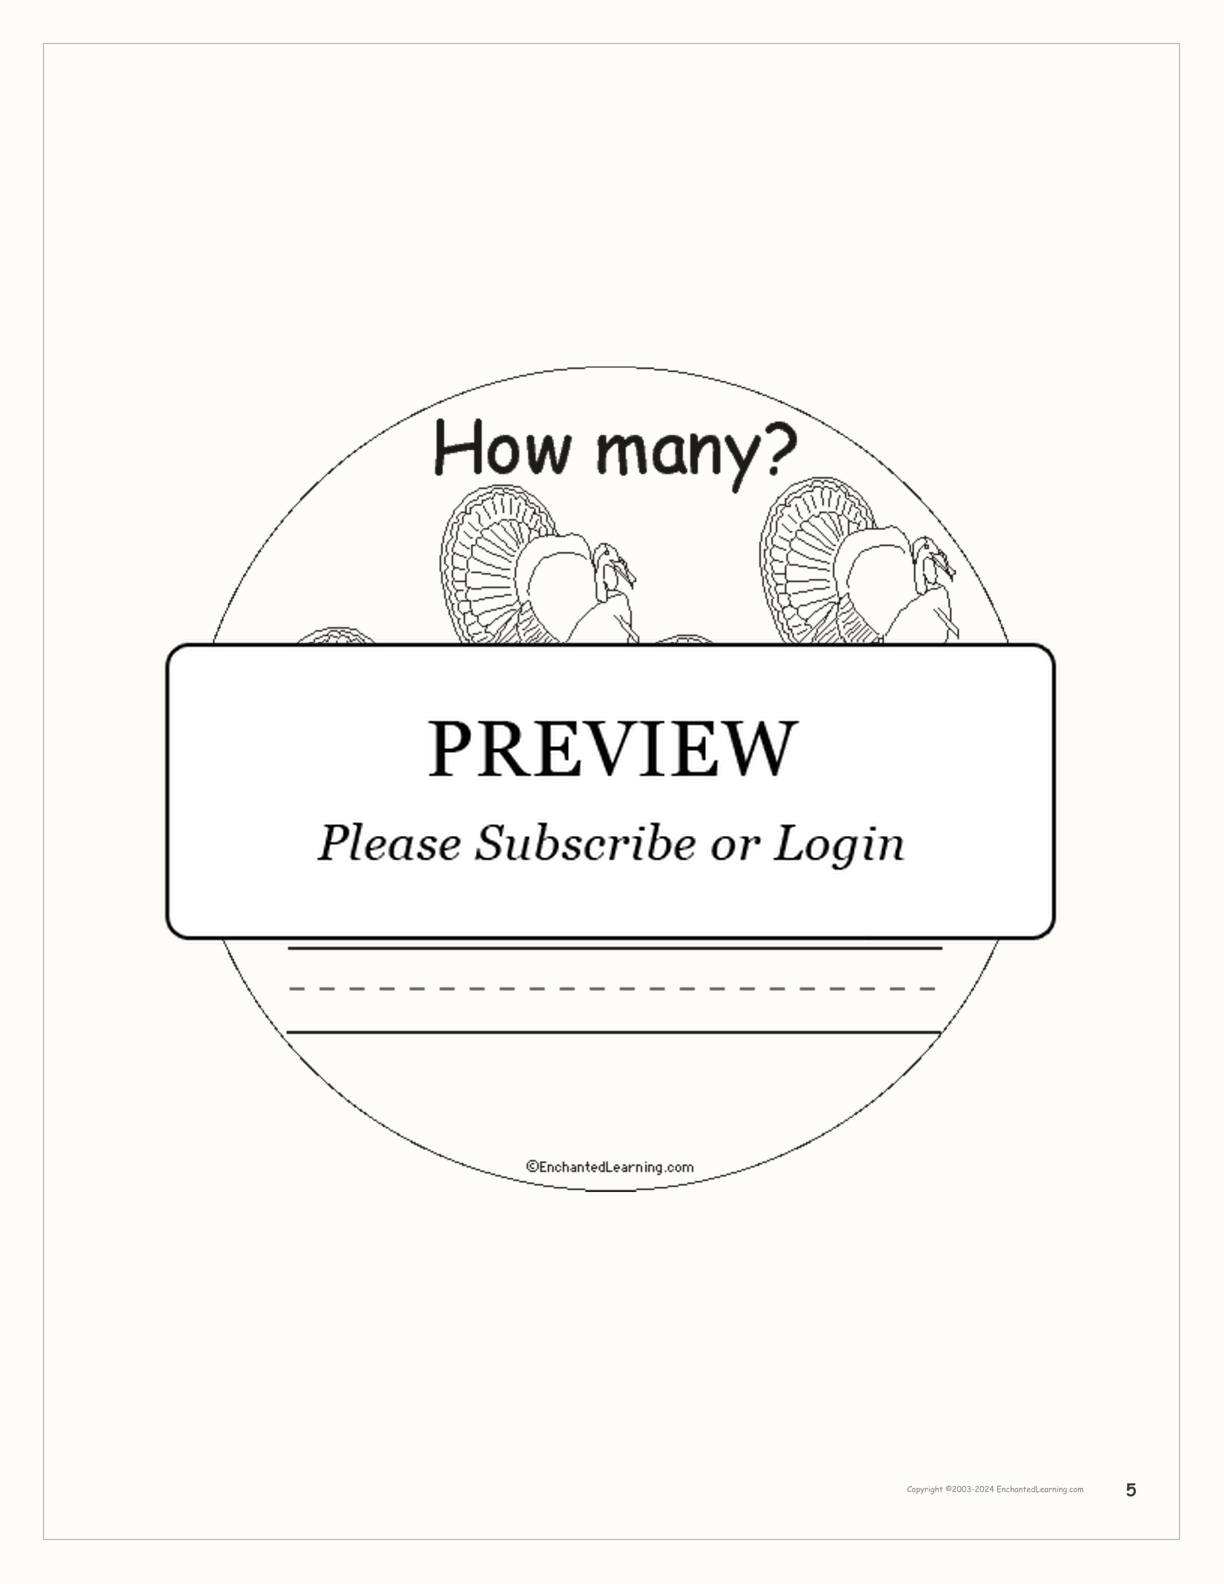 How Many Turkeys? interactive printout page 5